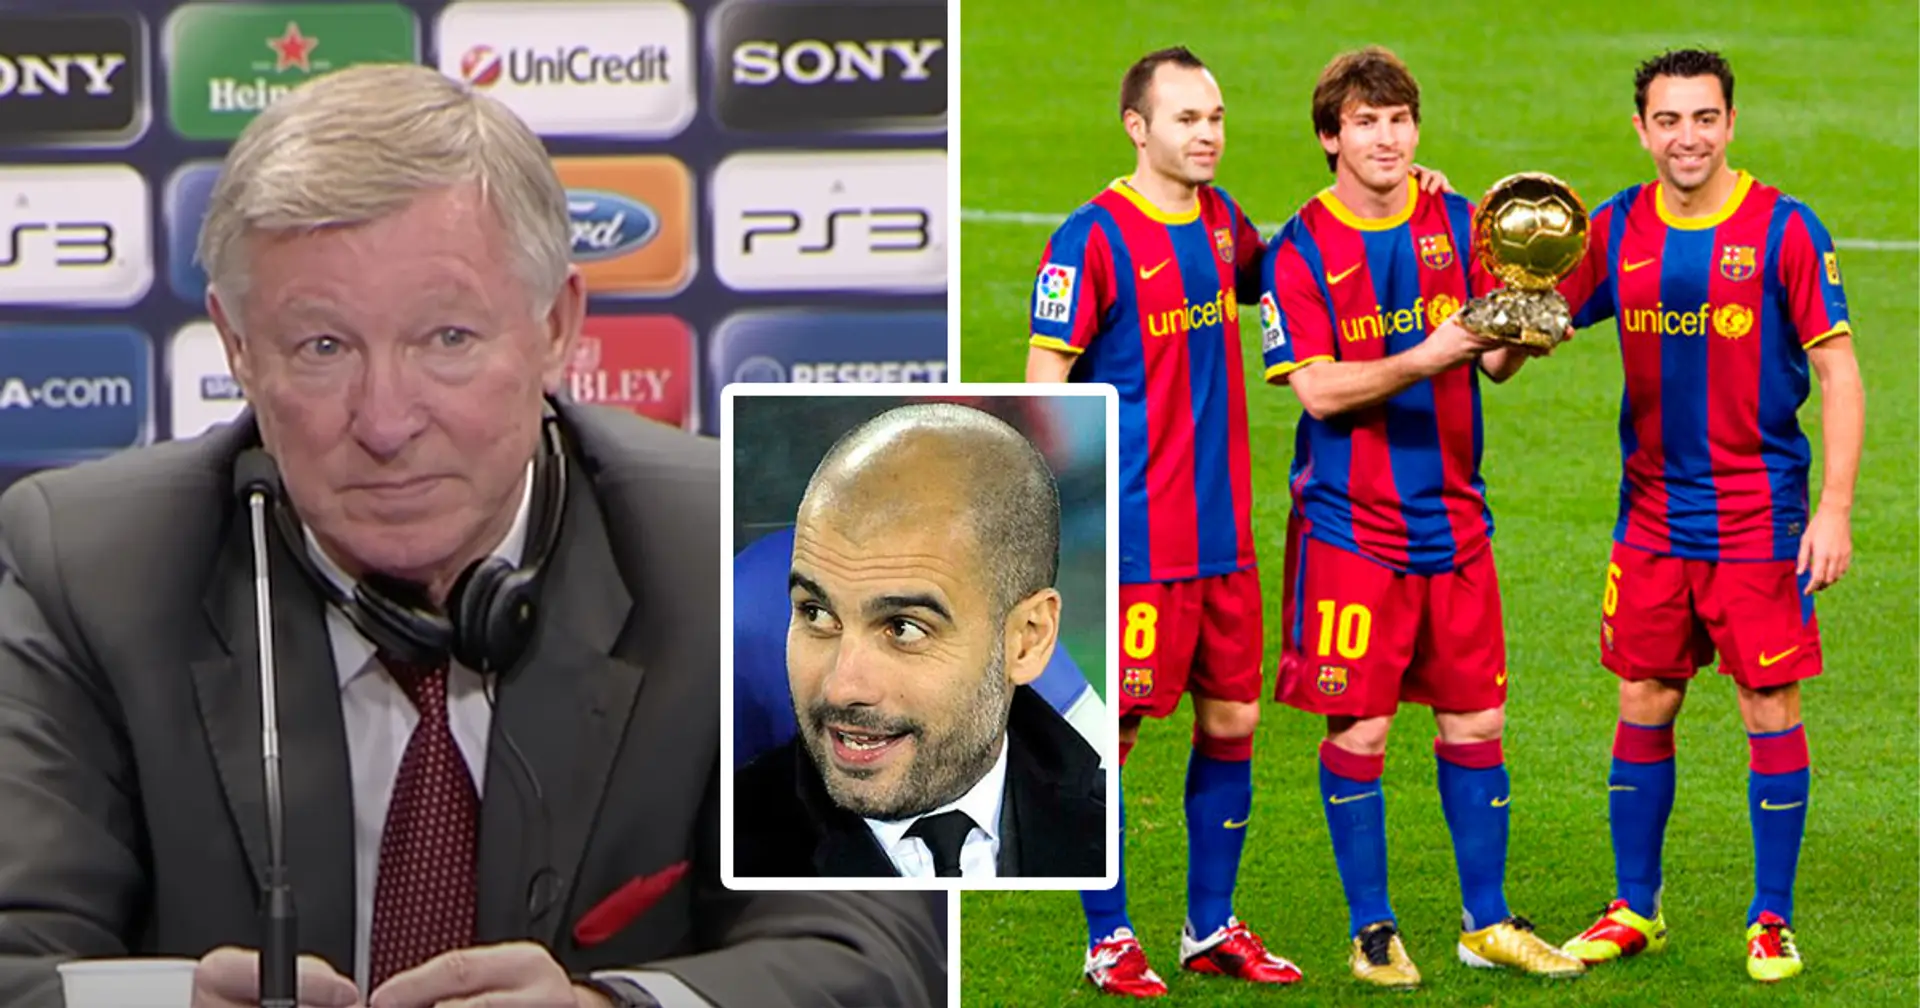 'Most stupid question of my life': What Sir Alex Ferguson said when asked which Barcelona player he would sign in 2011